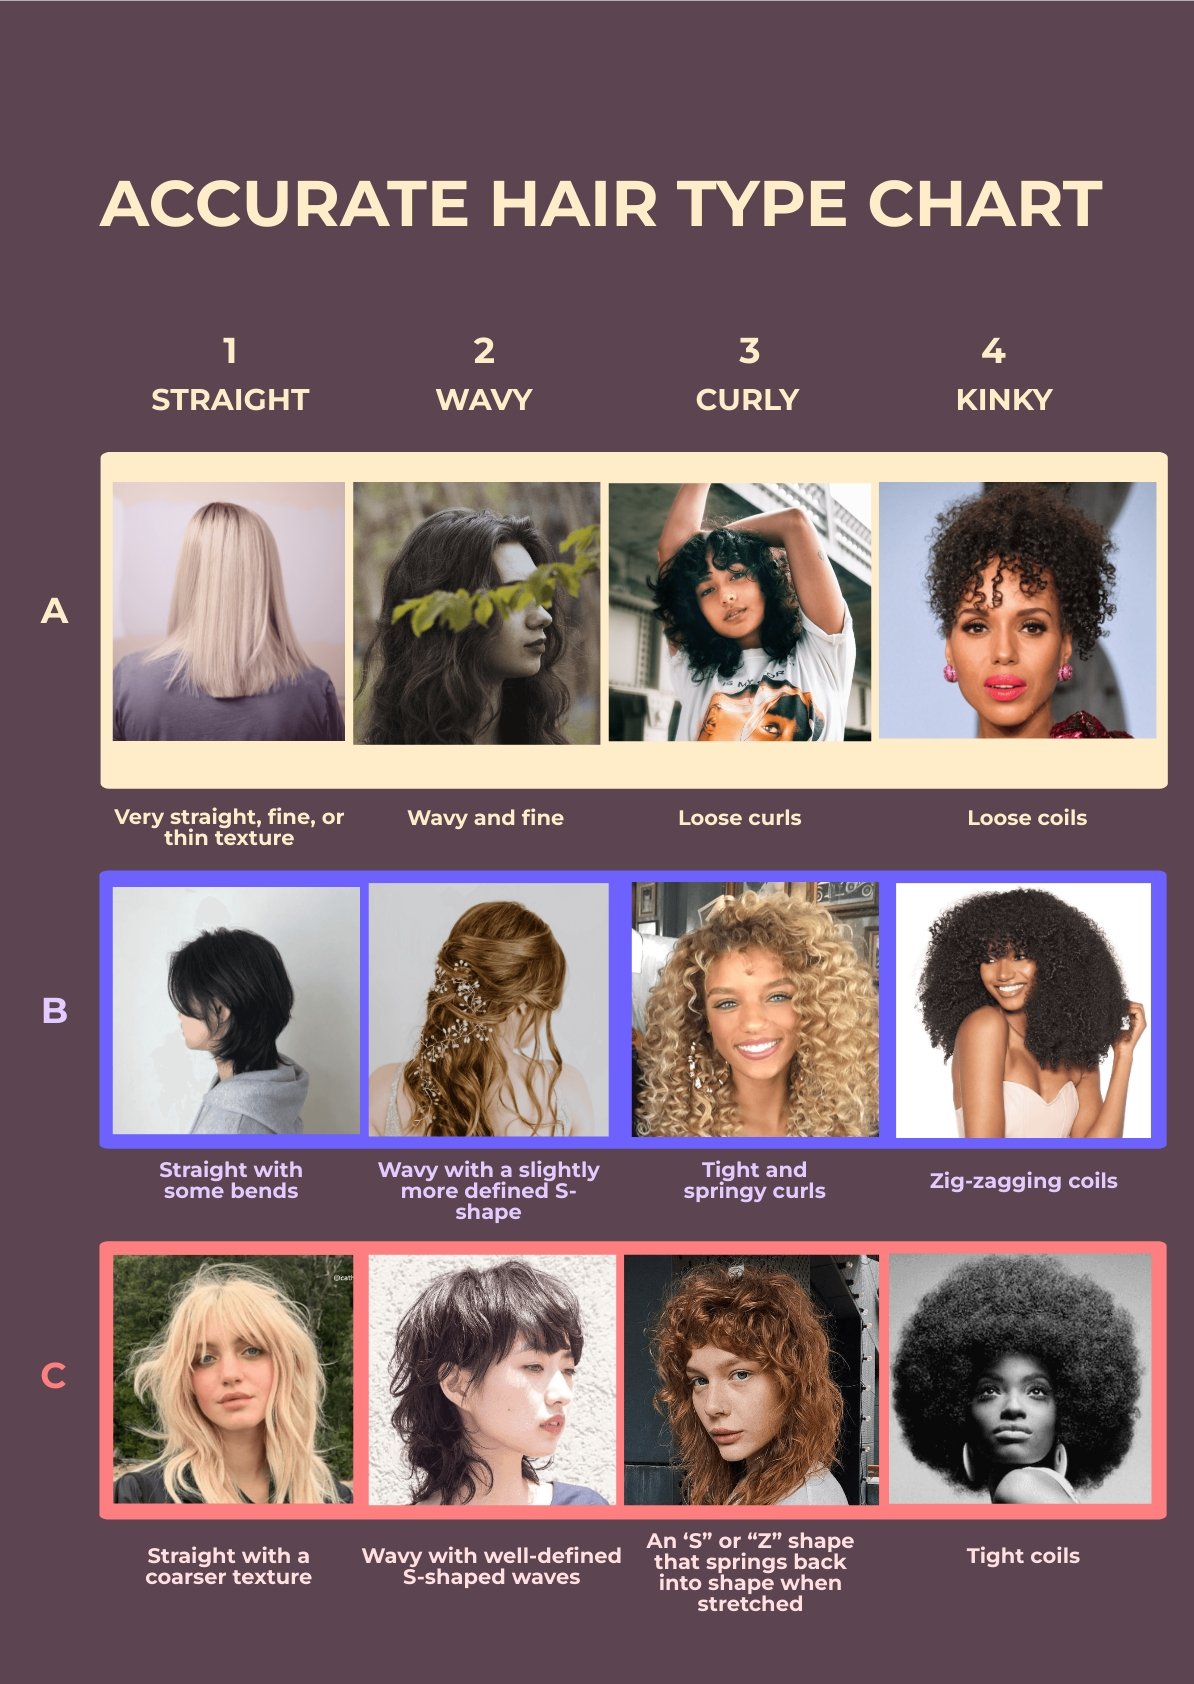 Accurate Hair Type Chart Template